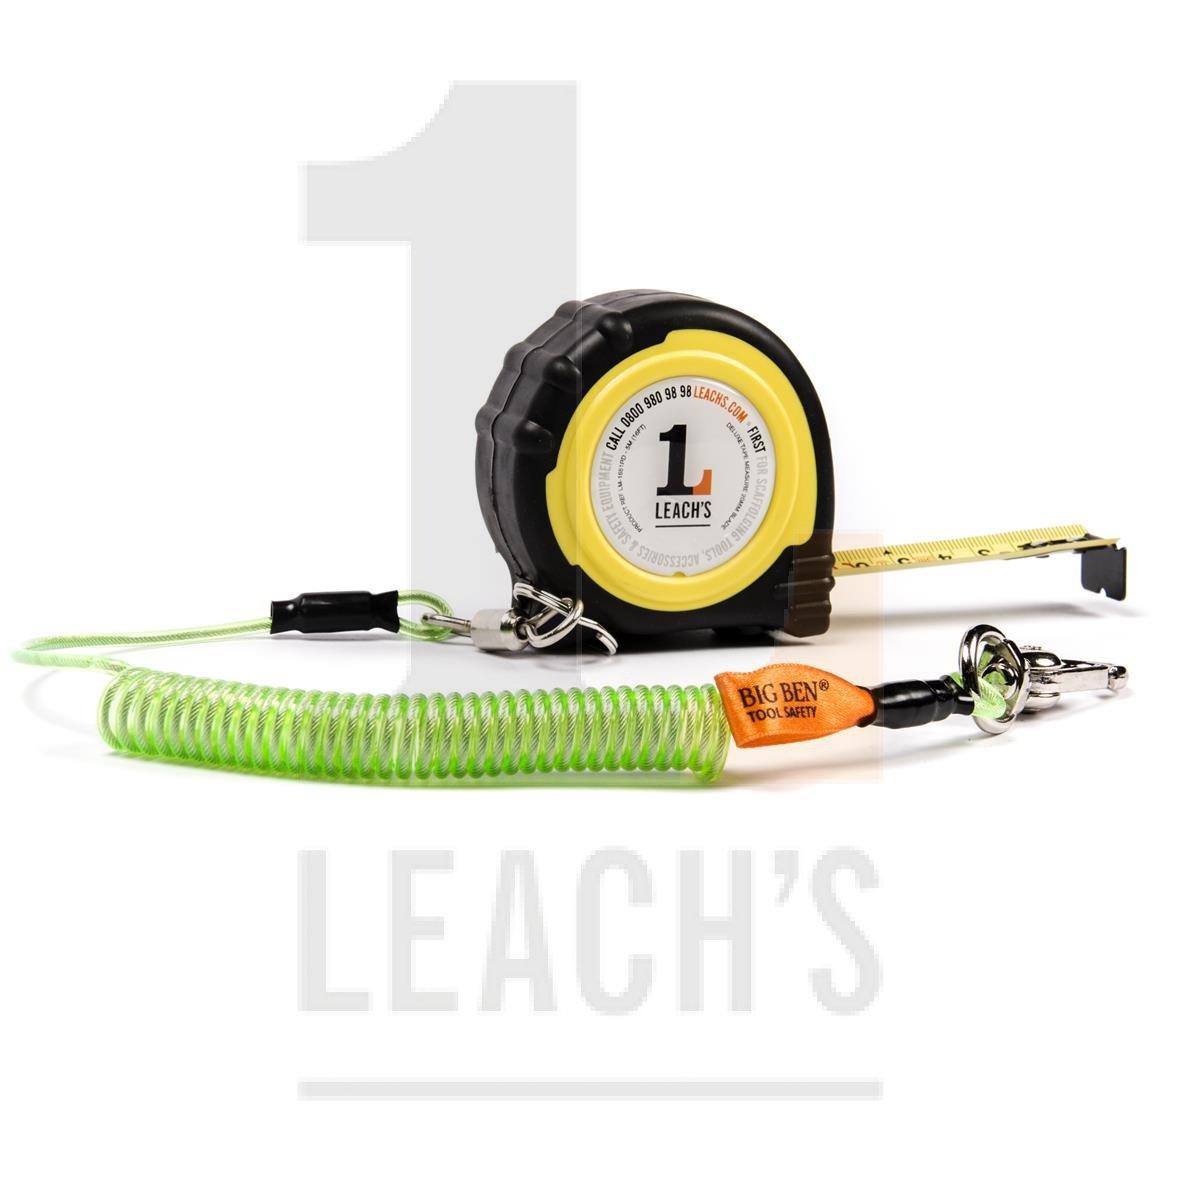 5m Roulette Measure Rubber Enclosed 20mm Blade c/w Green Deluxe Tool Safety Rope / Резеңкеден жасалған 5 м жабық рулетка - фото 2 - id-p105318606